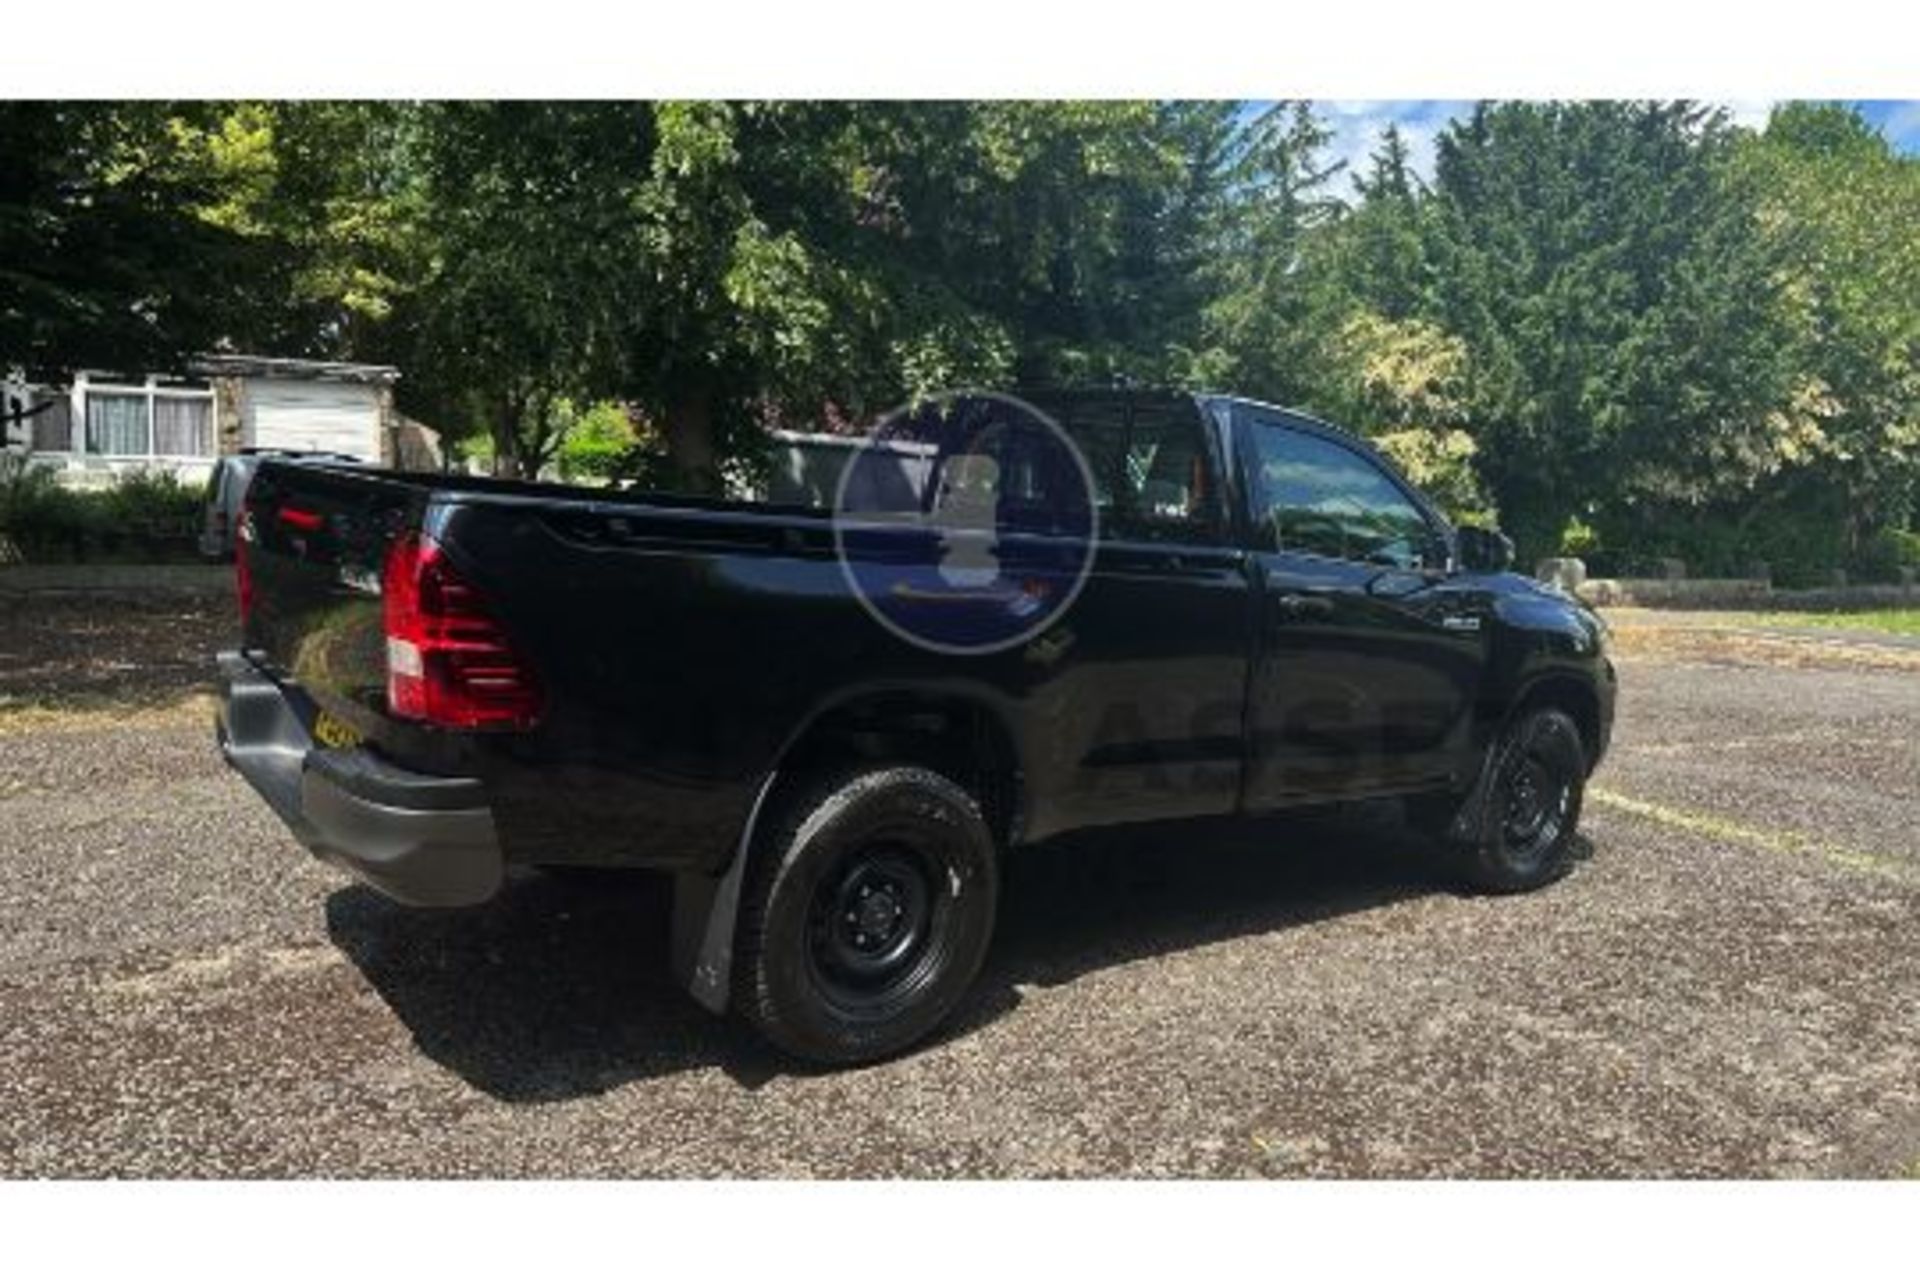 TOYOTA HILUX 2.4D-4D SINGLE CAB 4X4 PICK UP TRUCK - BLACK MODEL - 23 REG WITH DELIVERY MILES - WOW!! - Image 12 of 38